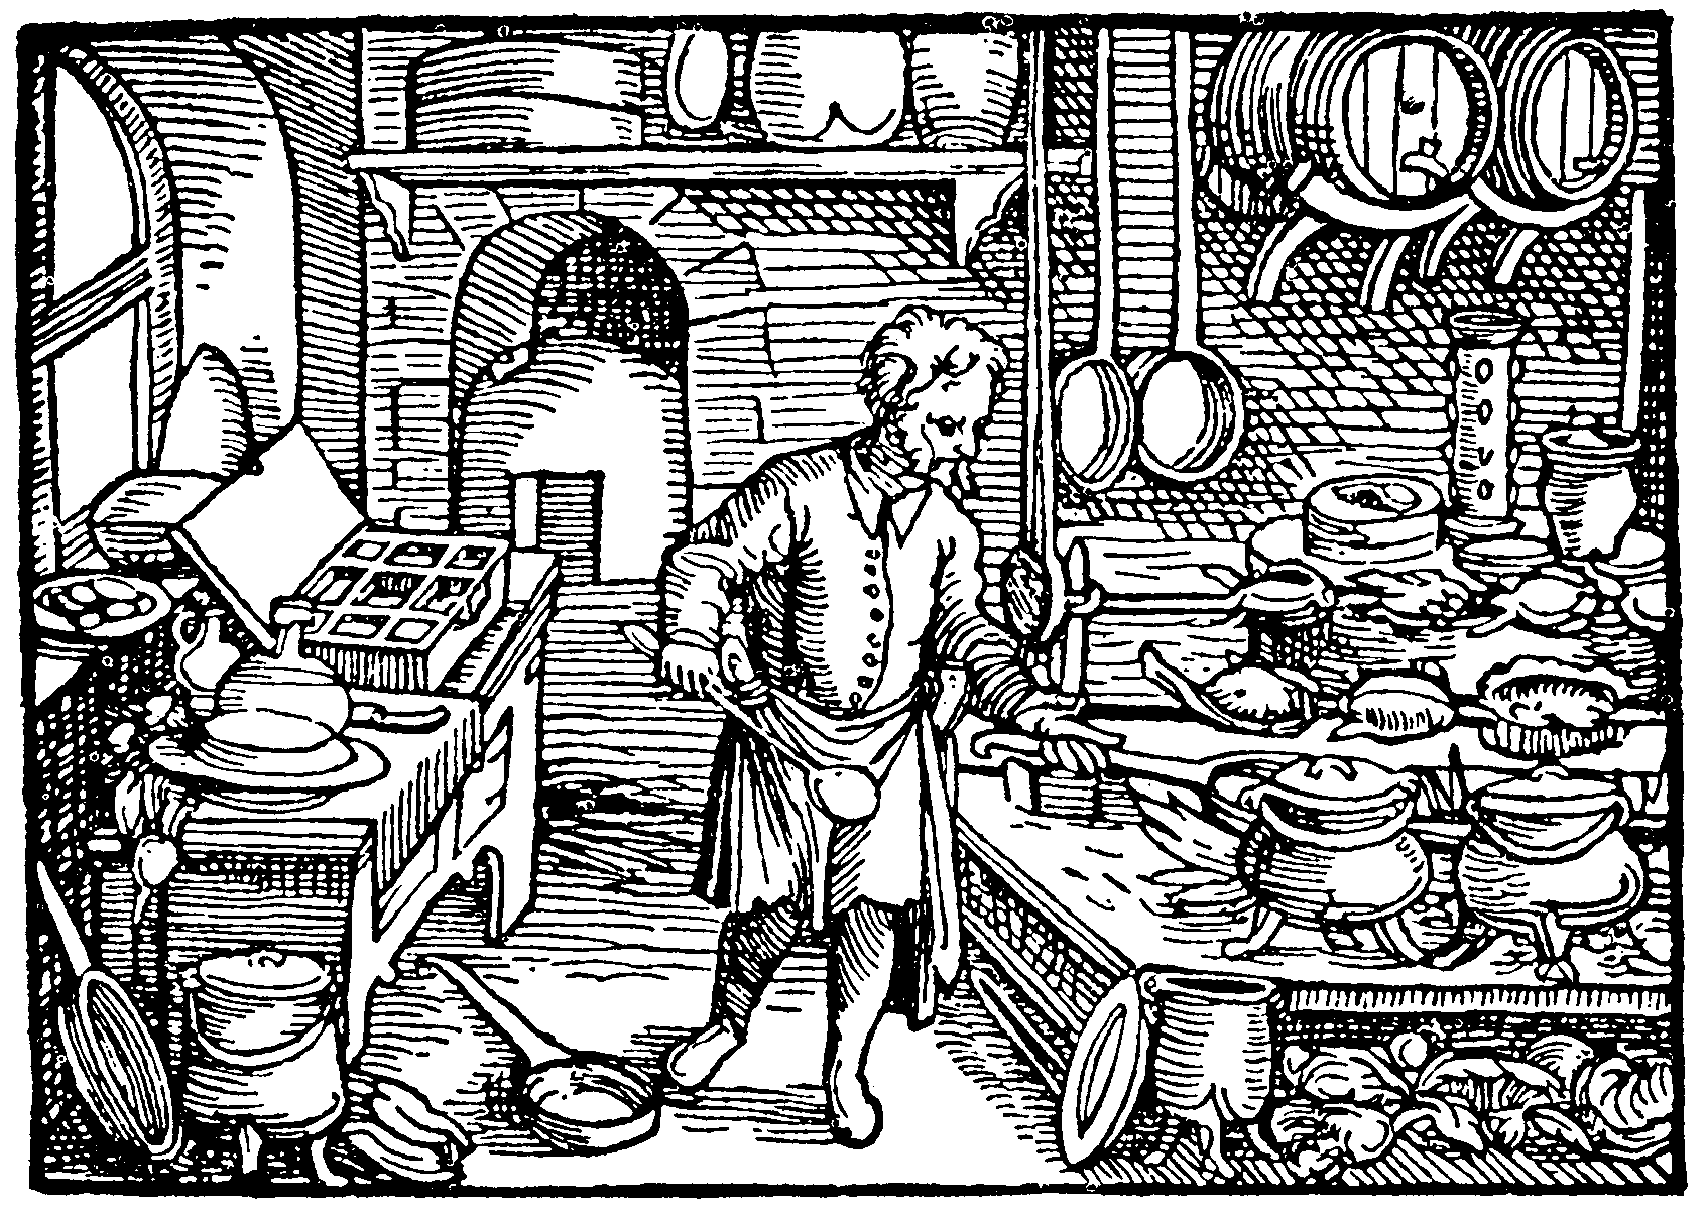 Here is what looked like a castle kitchen in the middle ages! A perfect print for coloring, lots of areas to color